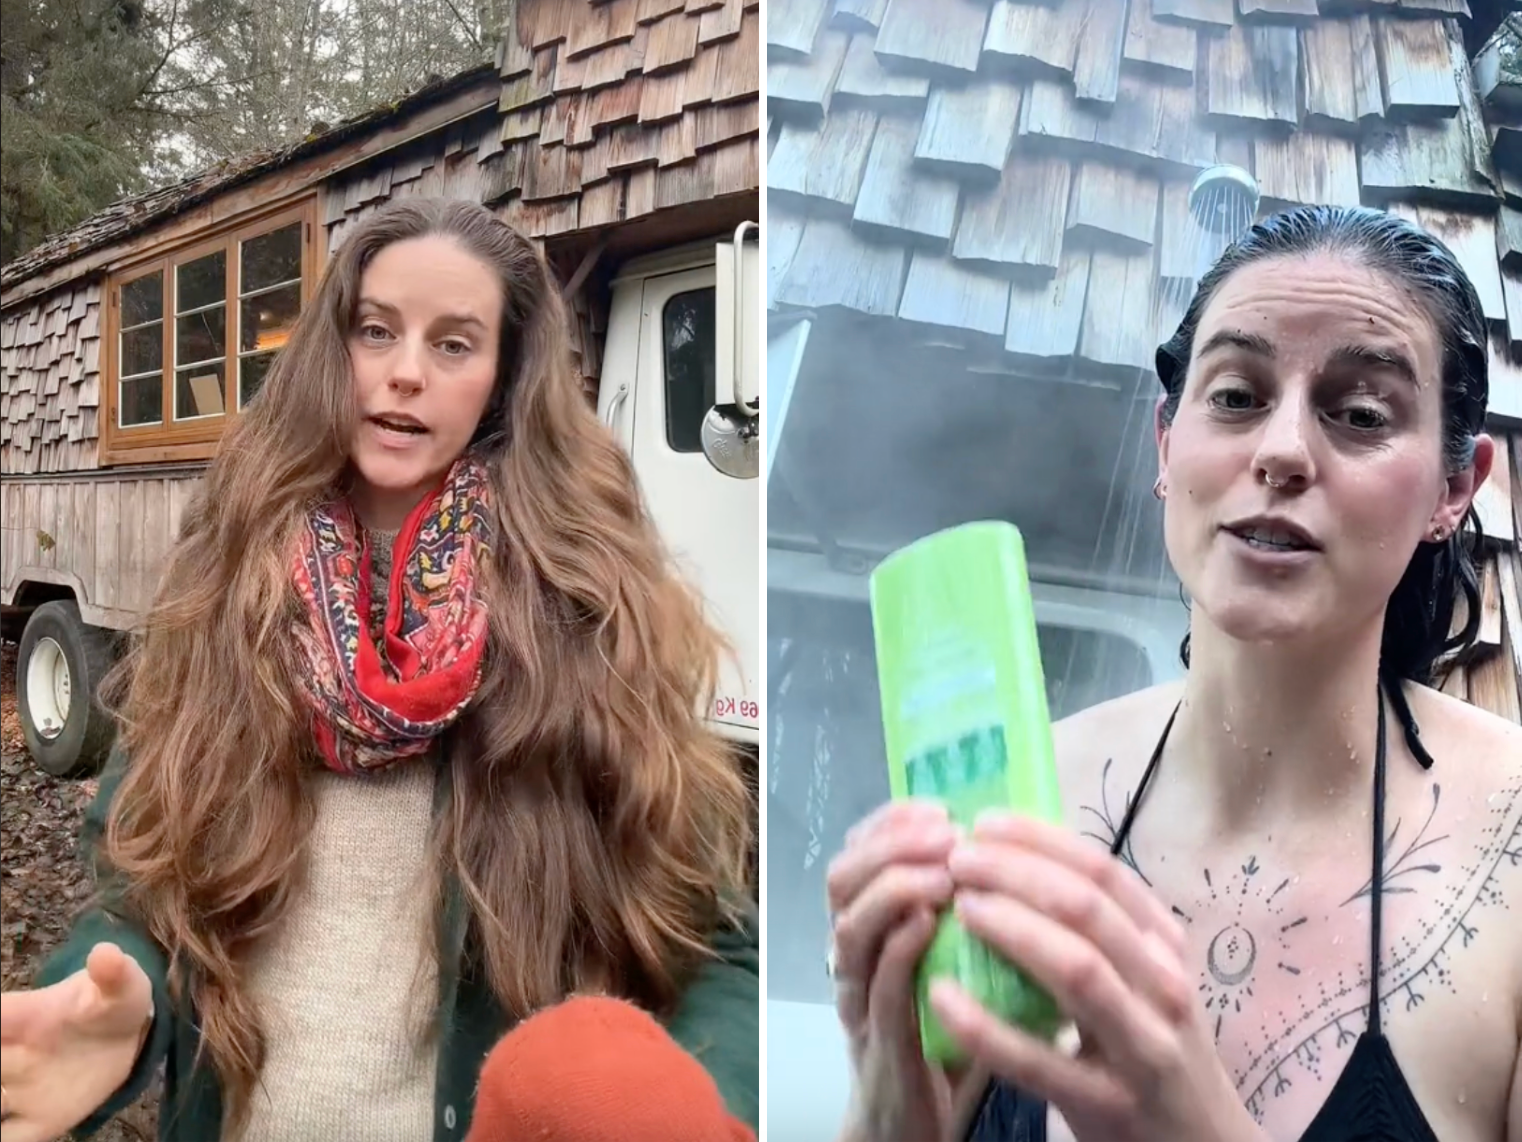 A woman who lives in a ‘housetruck’ in the woods showed how she washes her hair in the freezing cold — and responded to critics about not using eco-friendly products